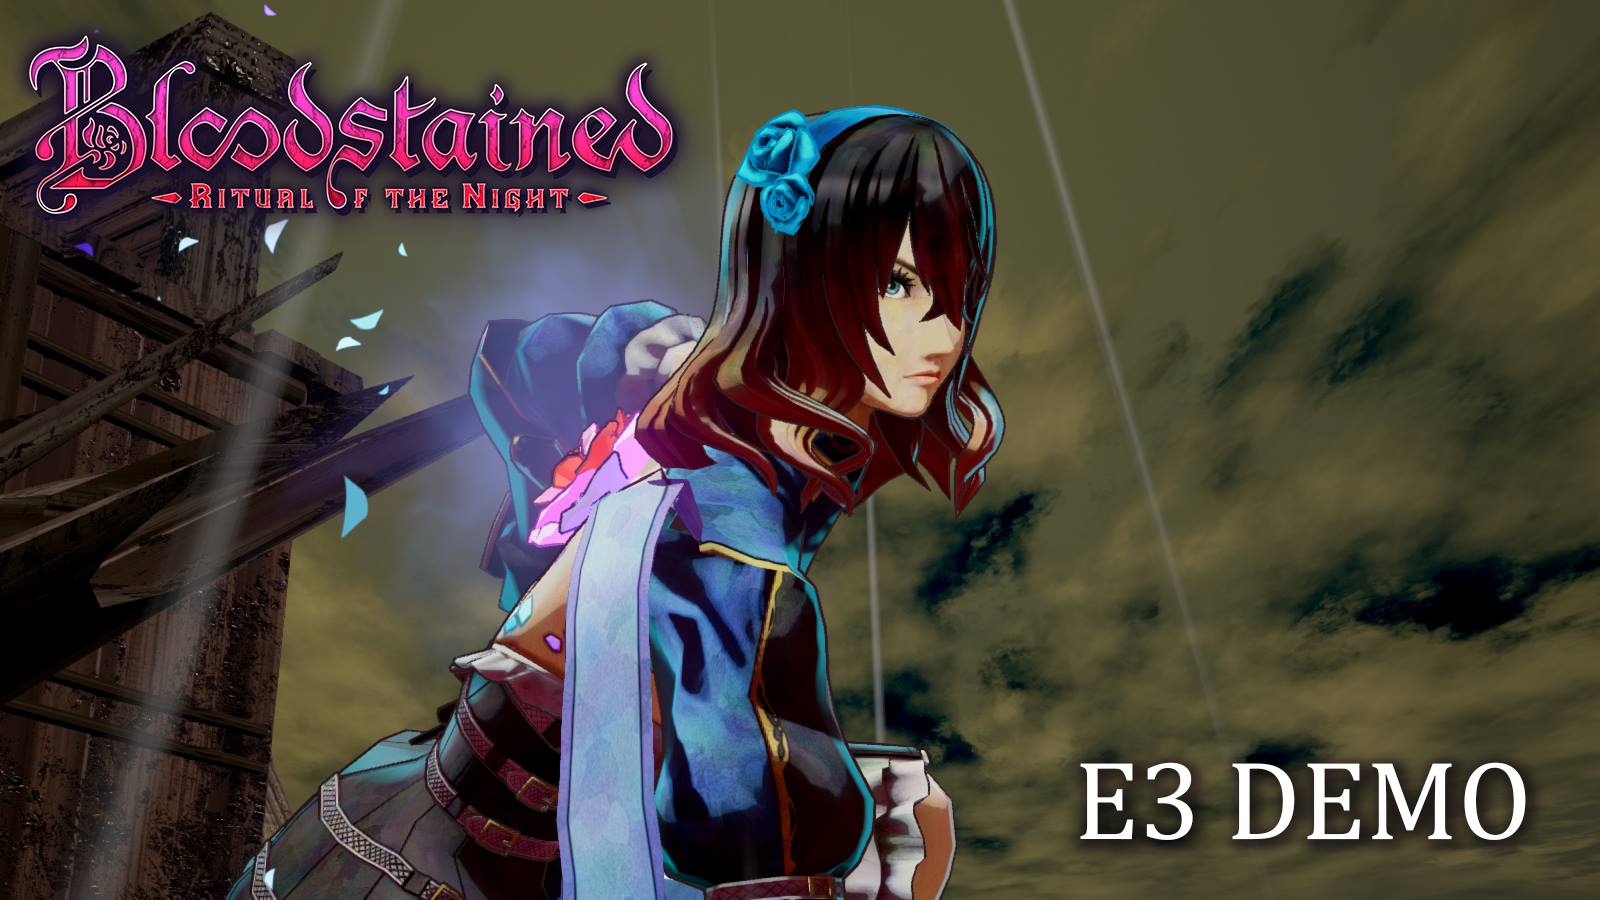 [New Game] Bloodstained: Ritual of the Night E3 Demo